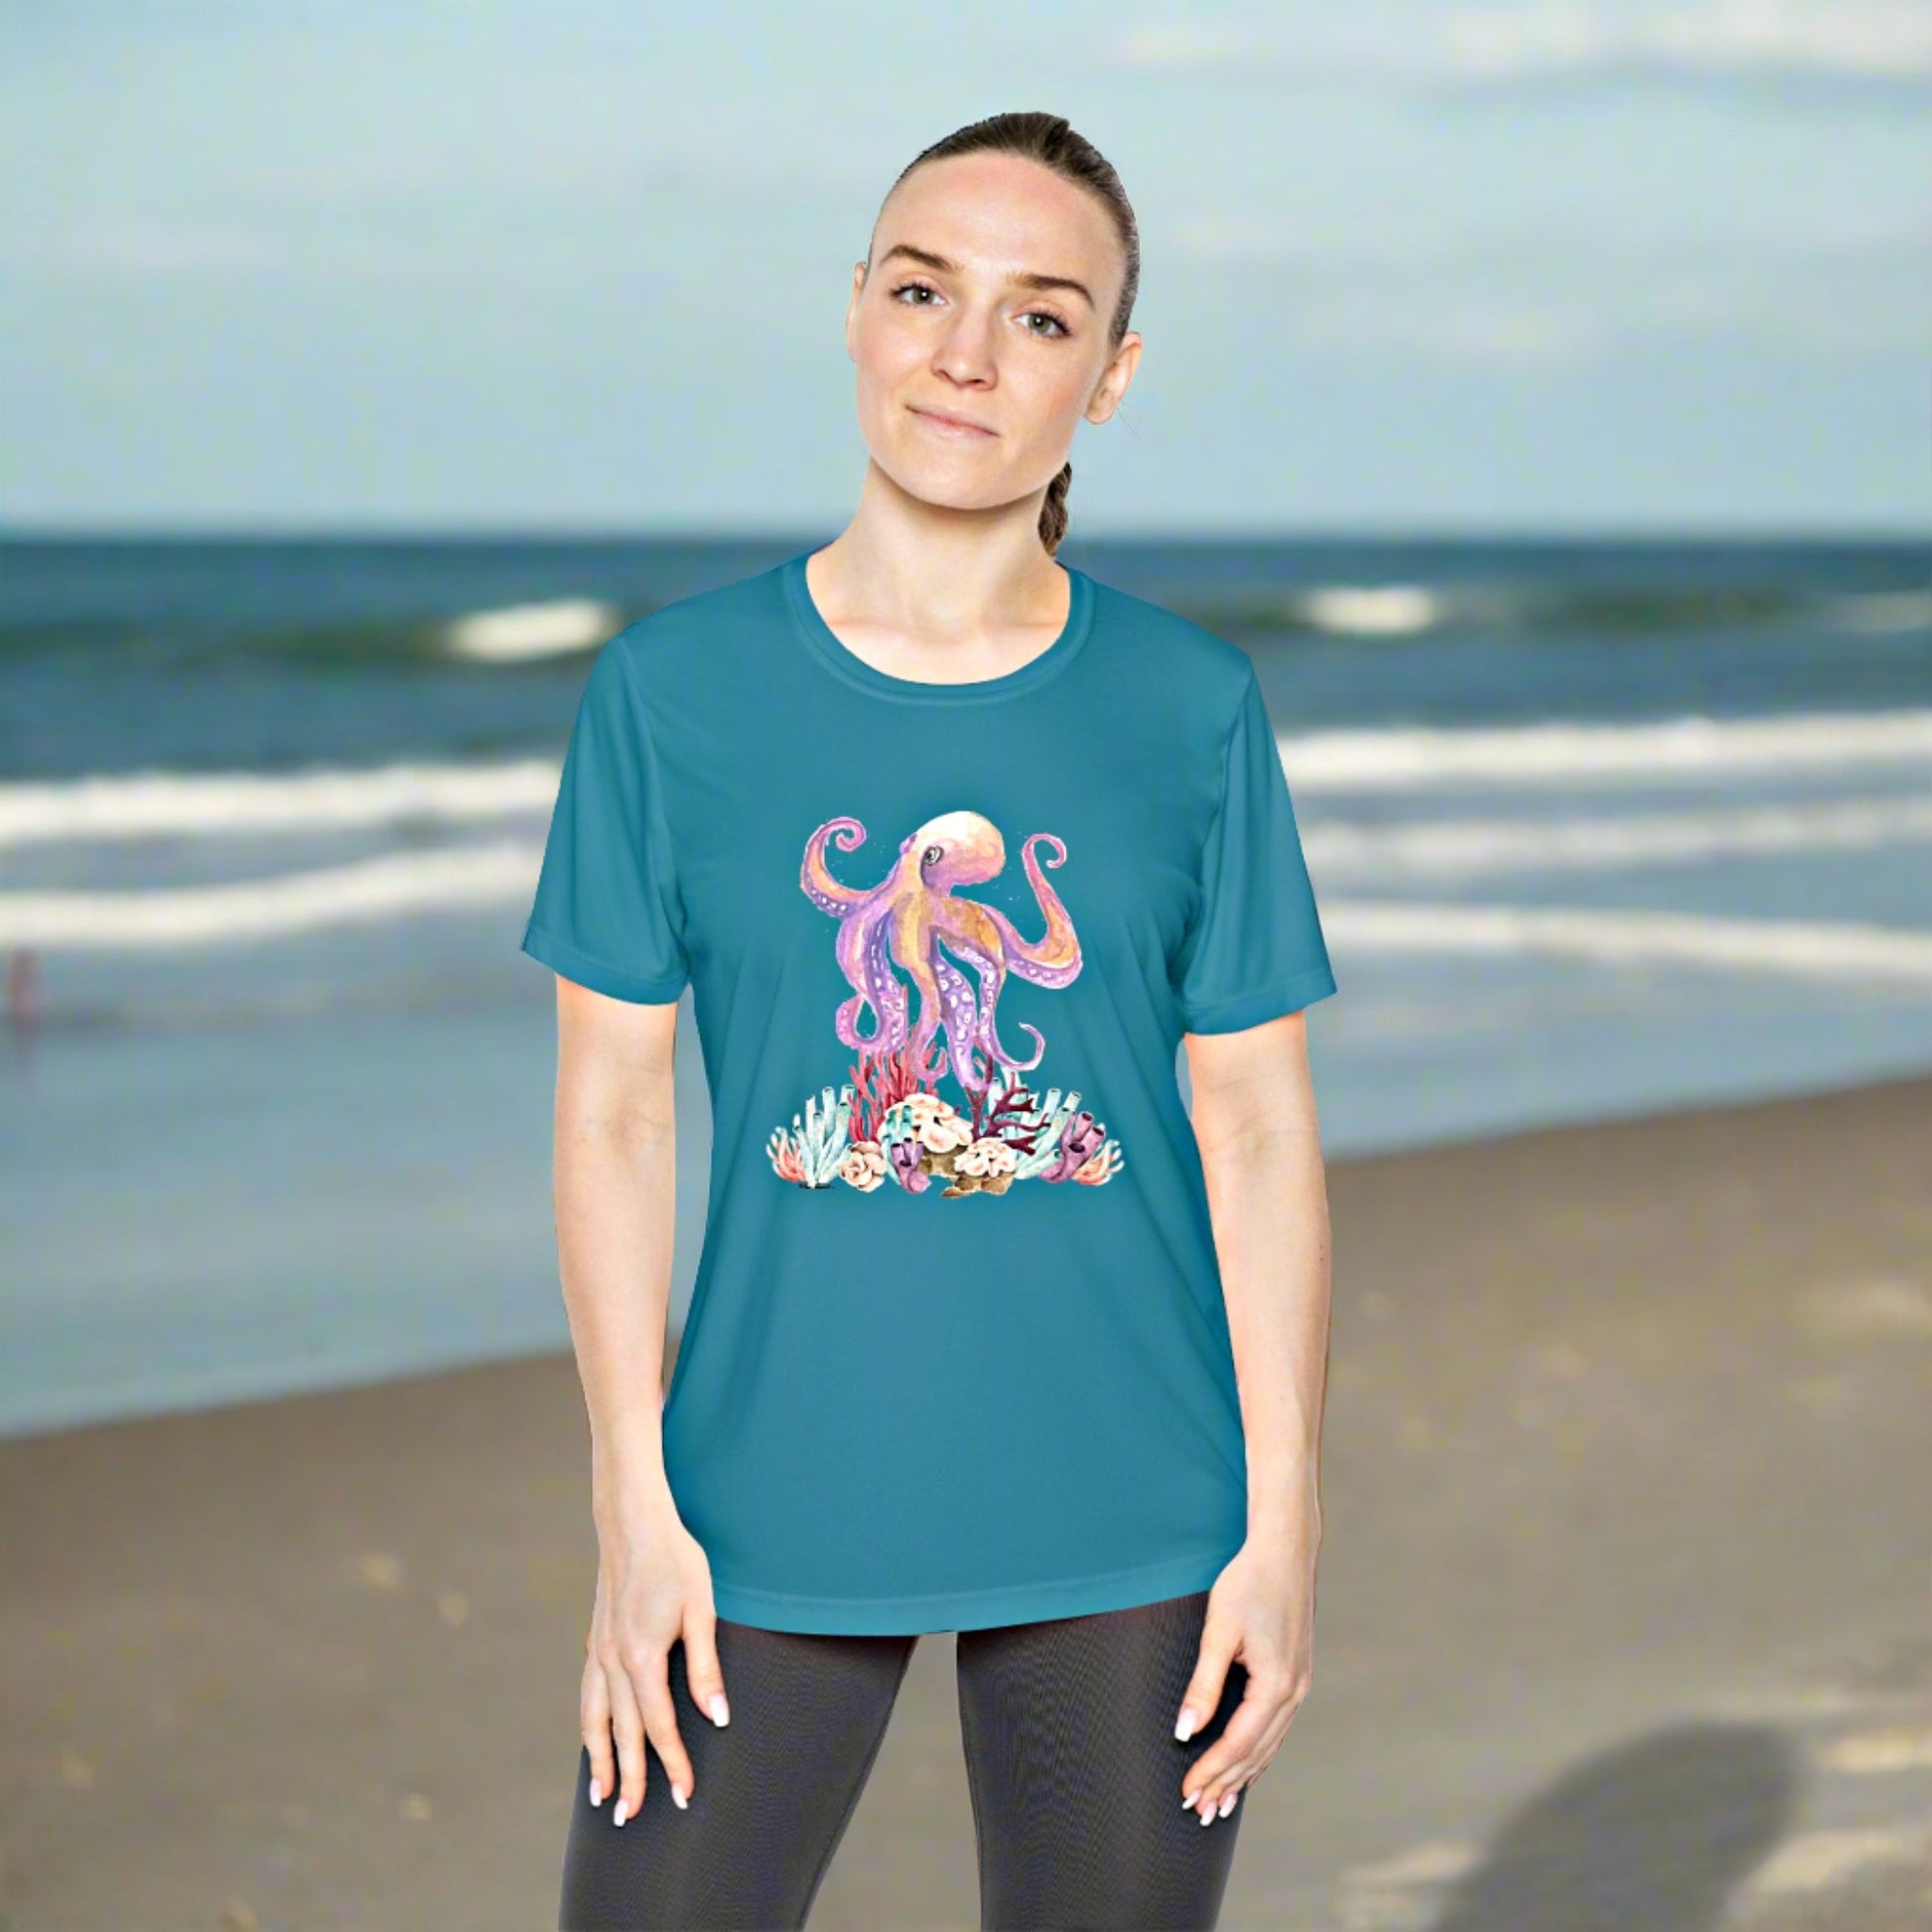 Mock up of a woman wearing our shirt